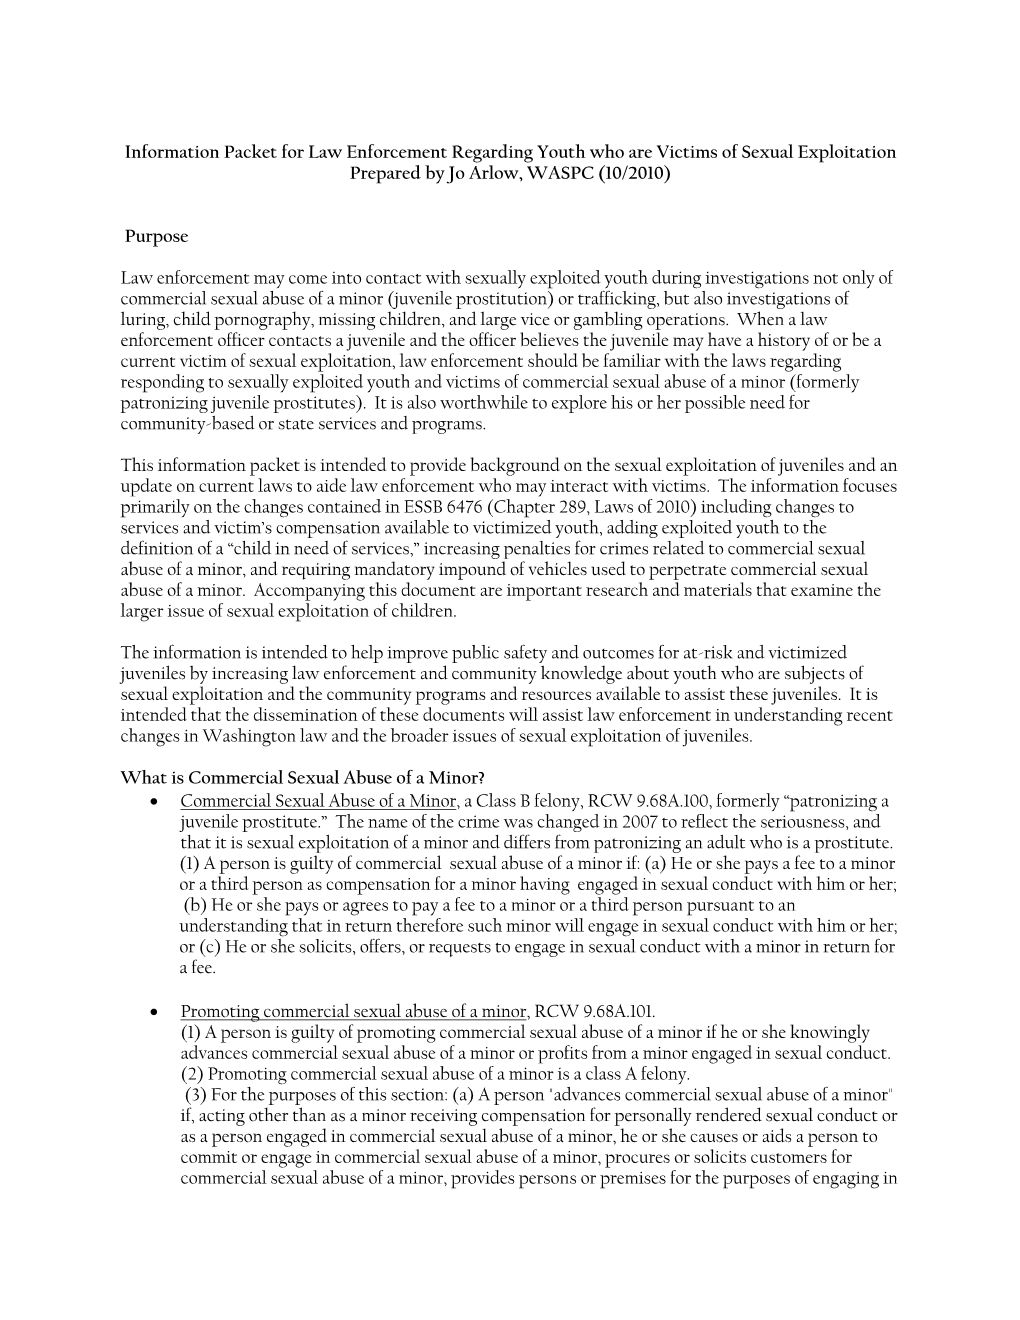 Information Packet for Law Enforcement Regarding Youth Who Are Victims of Sexual Exploitation Prepared by Jo Arlow, WASPC (10/2010)